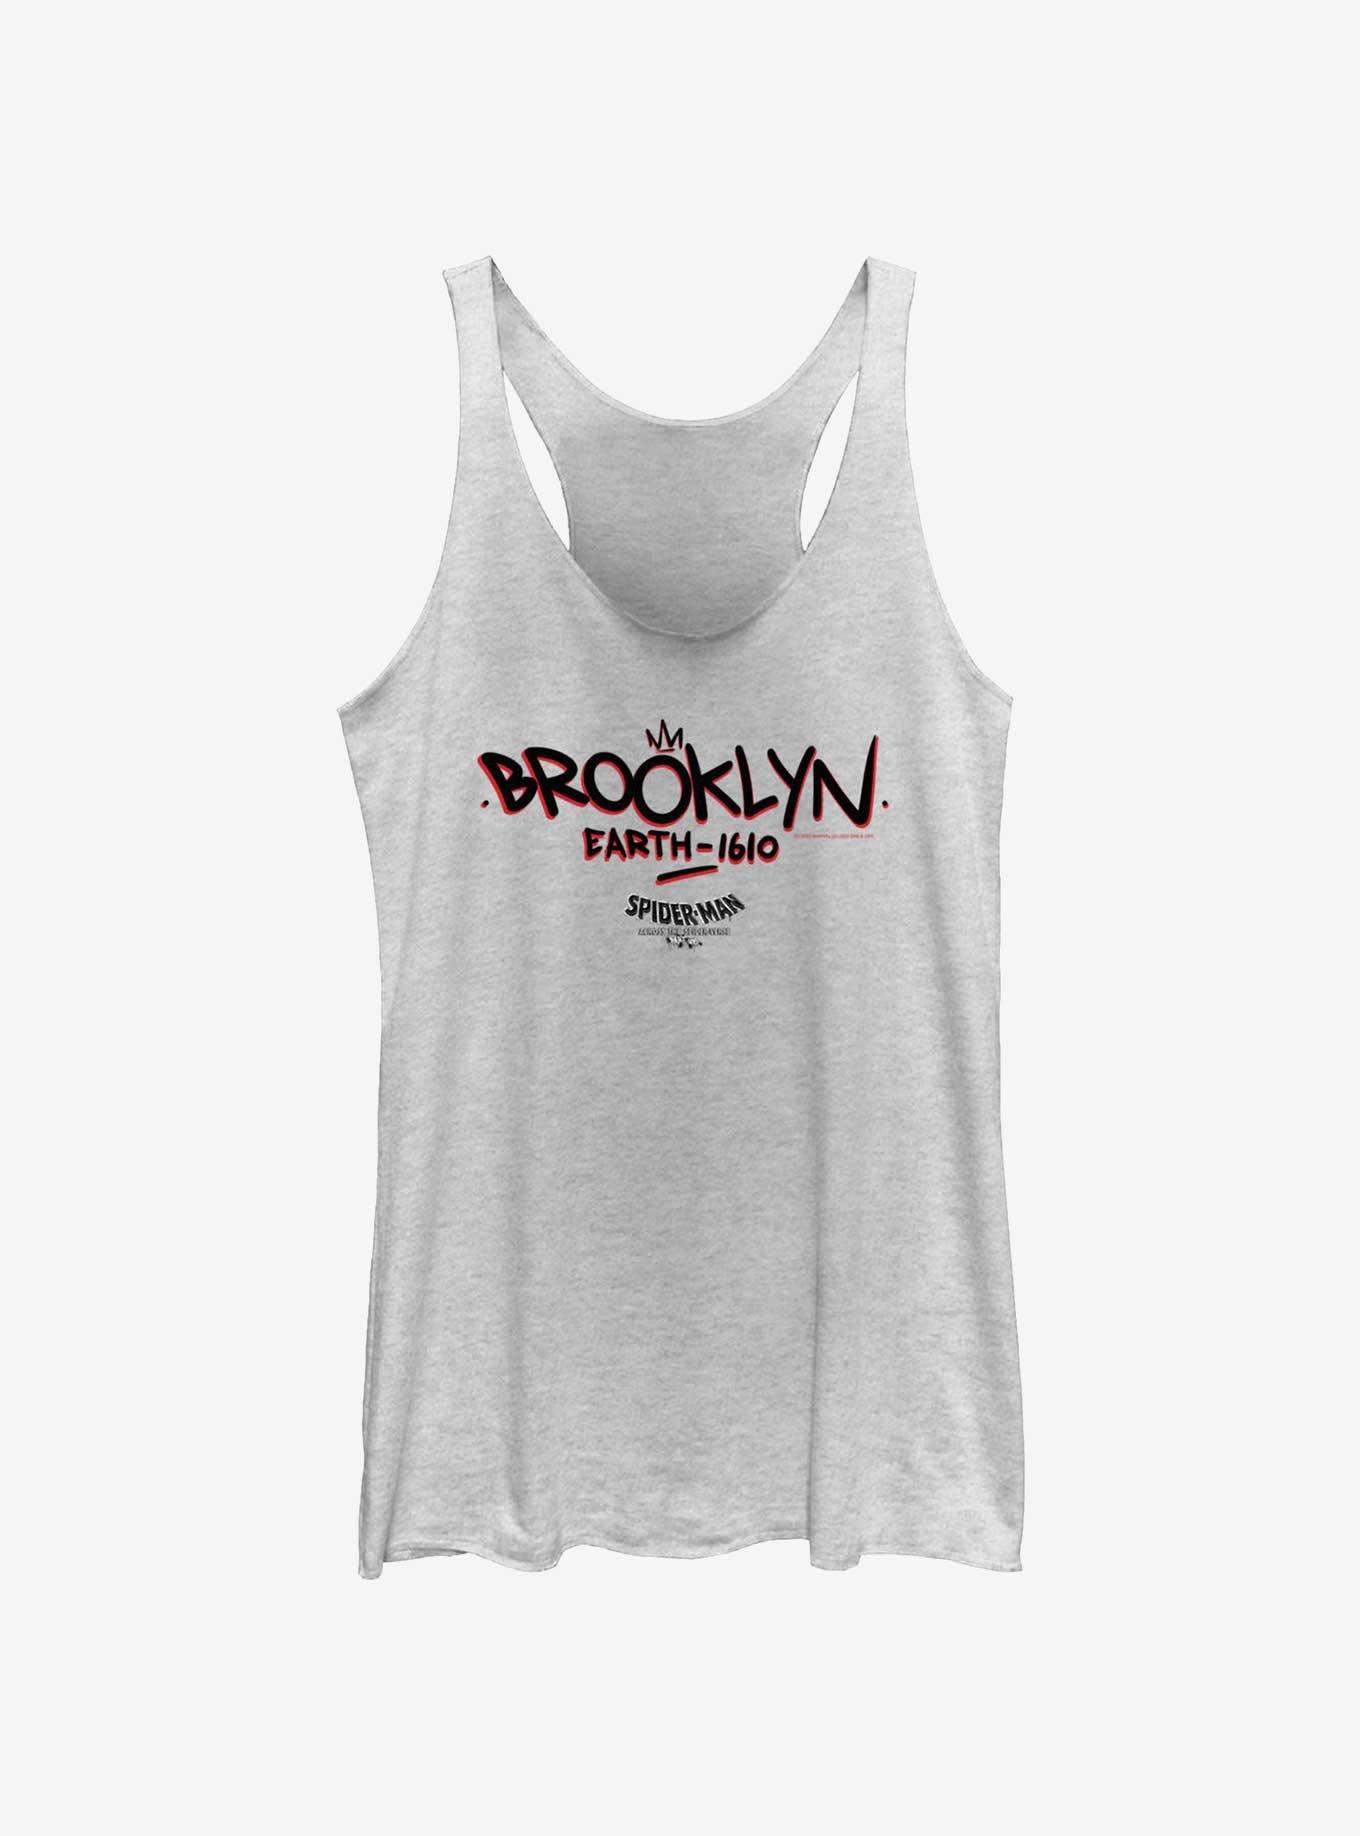 Marvel Spider-Man: Across The Spider-Verse Brooklyn Earth-1610 Womens Tank Top, WHITE HTR, hi-res